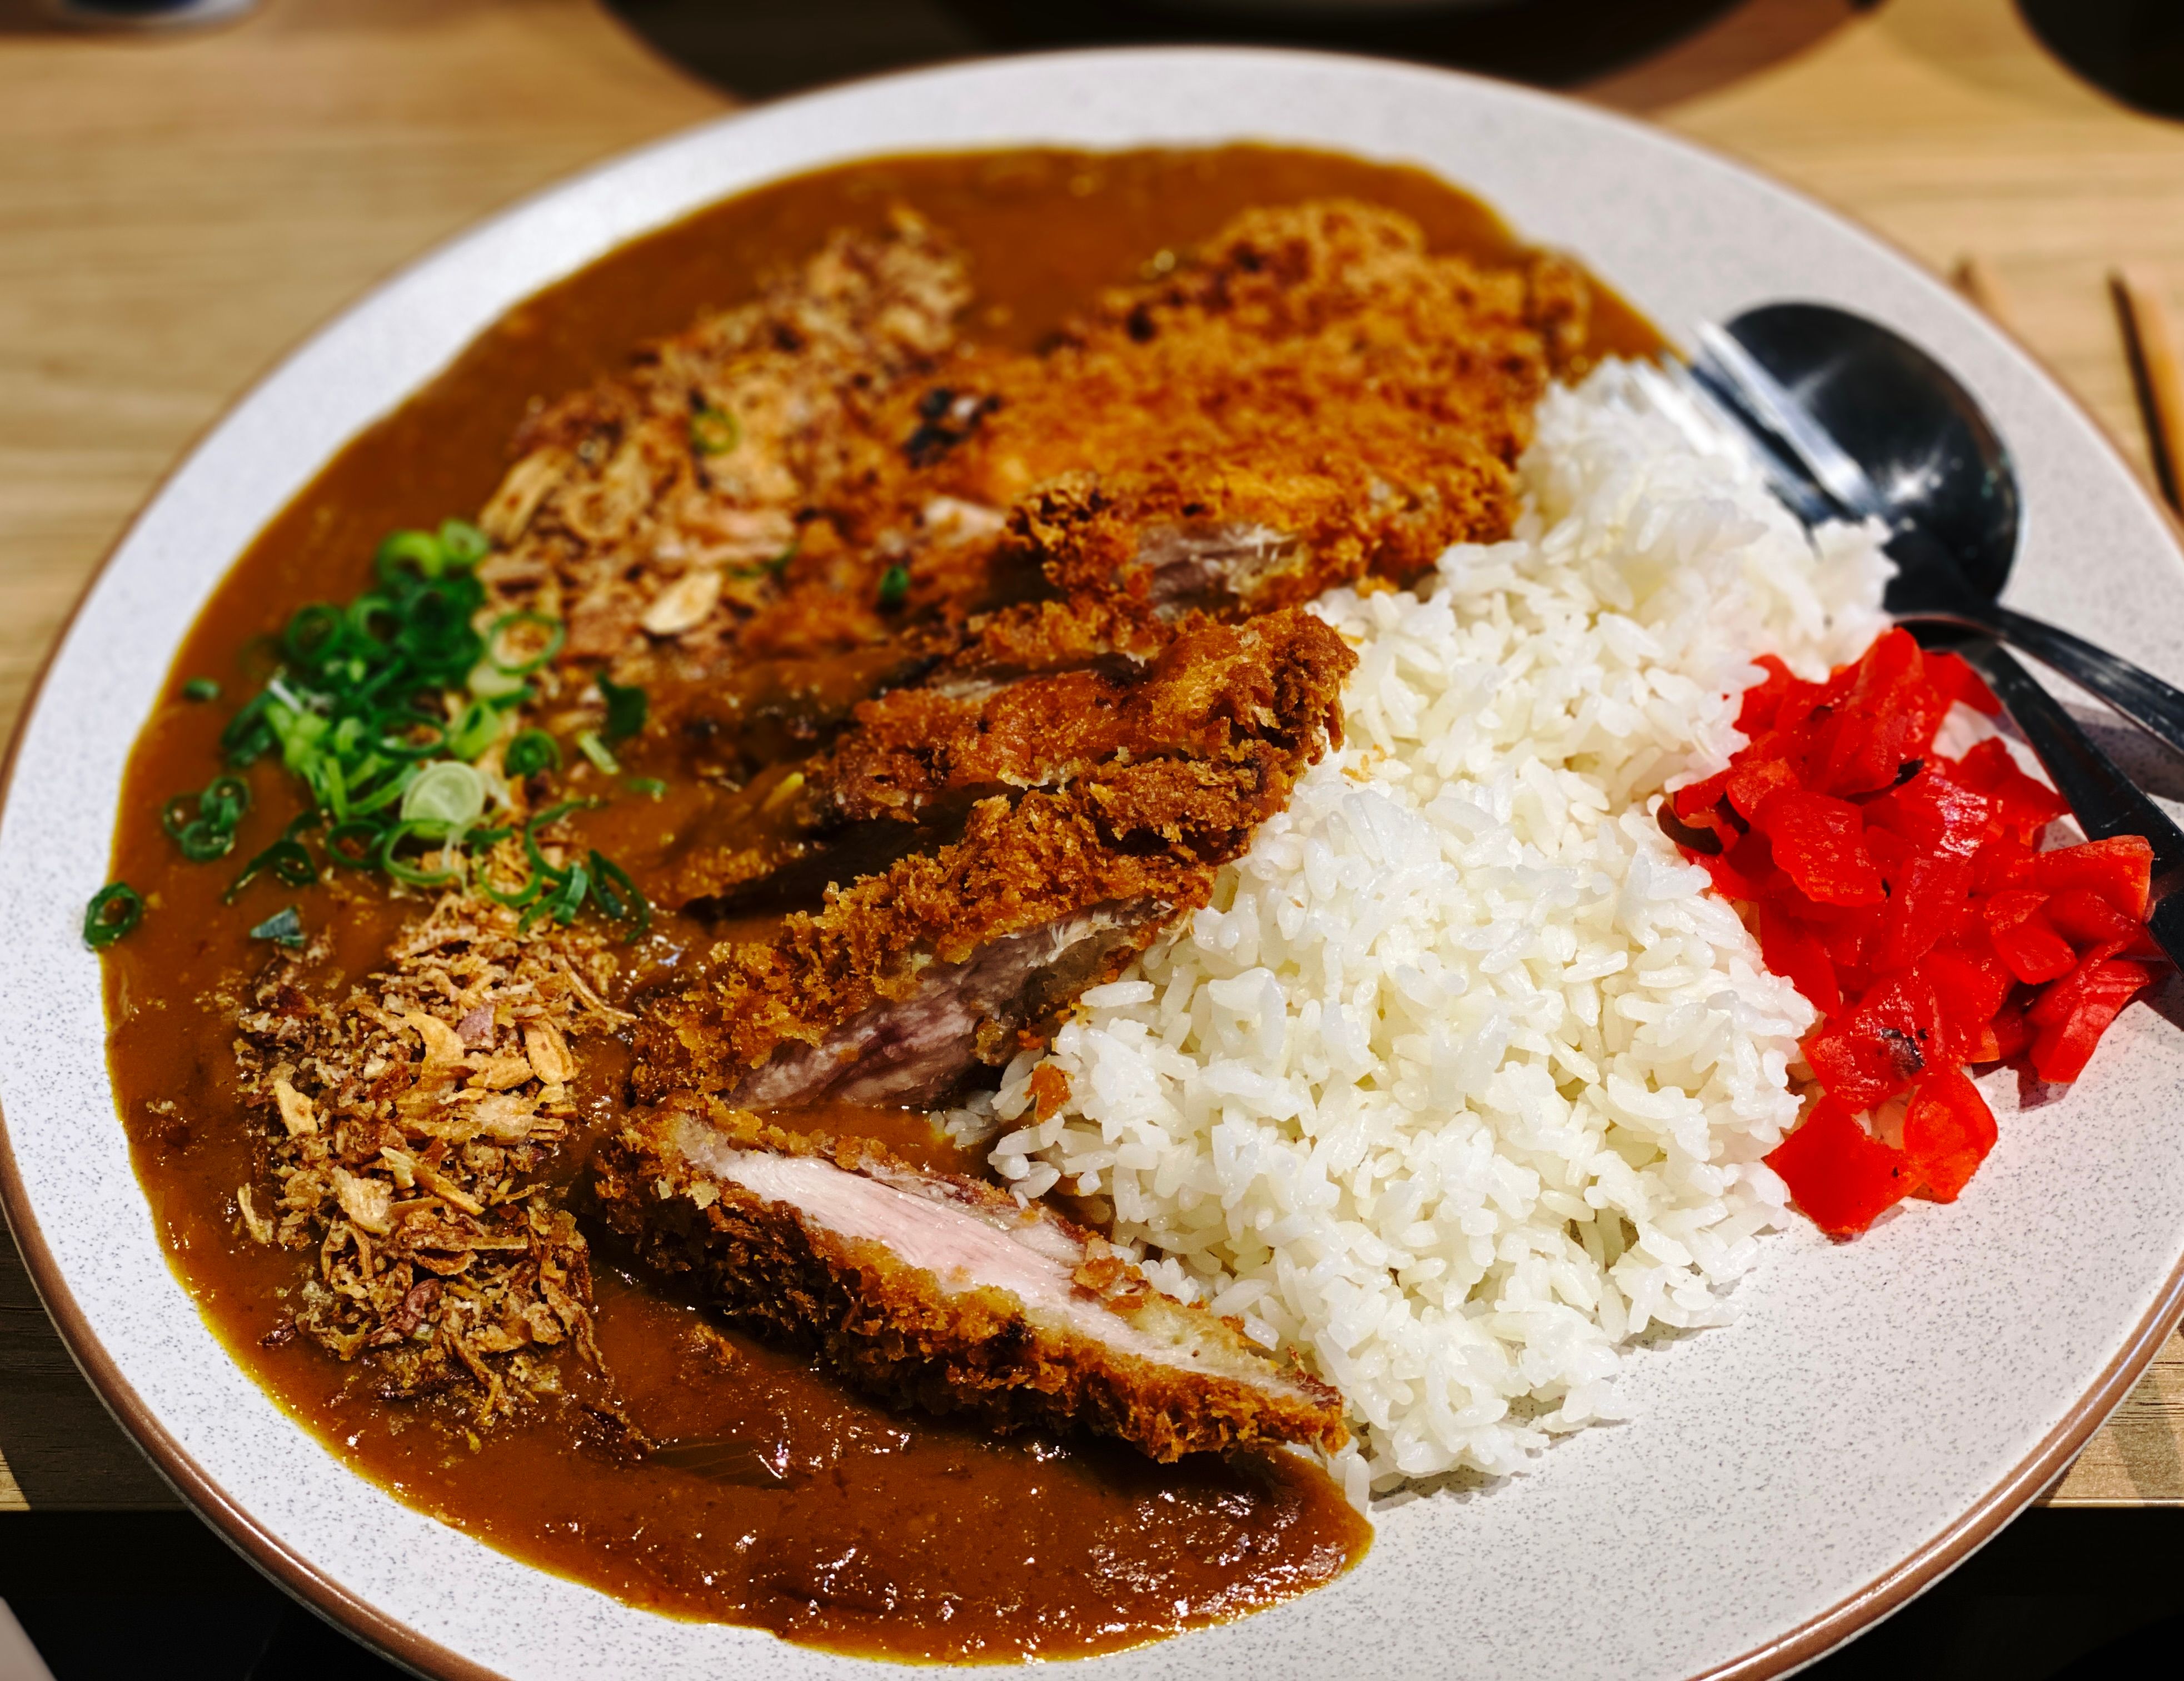 A very large plate half covered in a thick brown sauce, with rice and sliced up fried chicken on the other side.